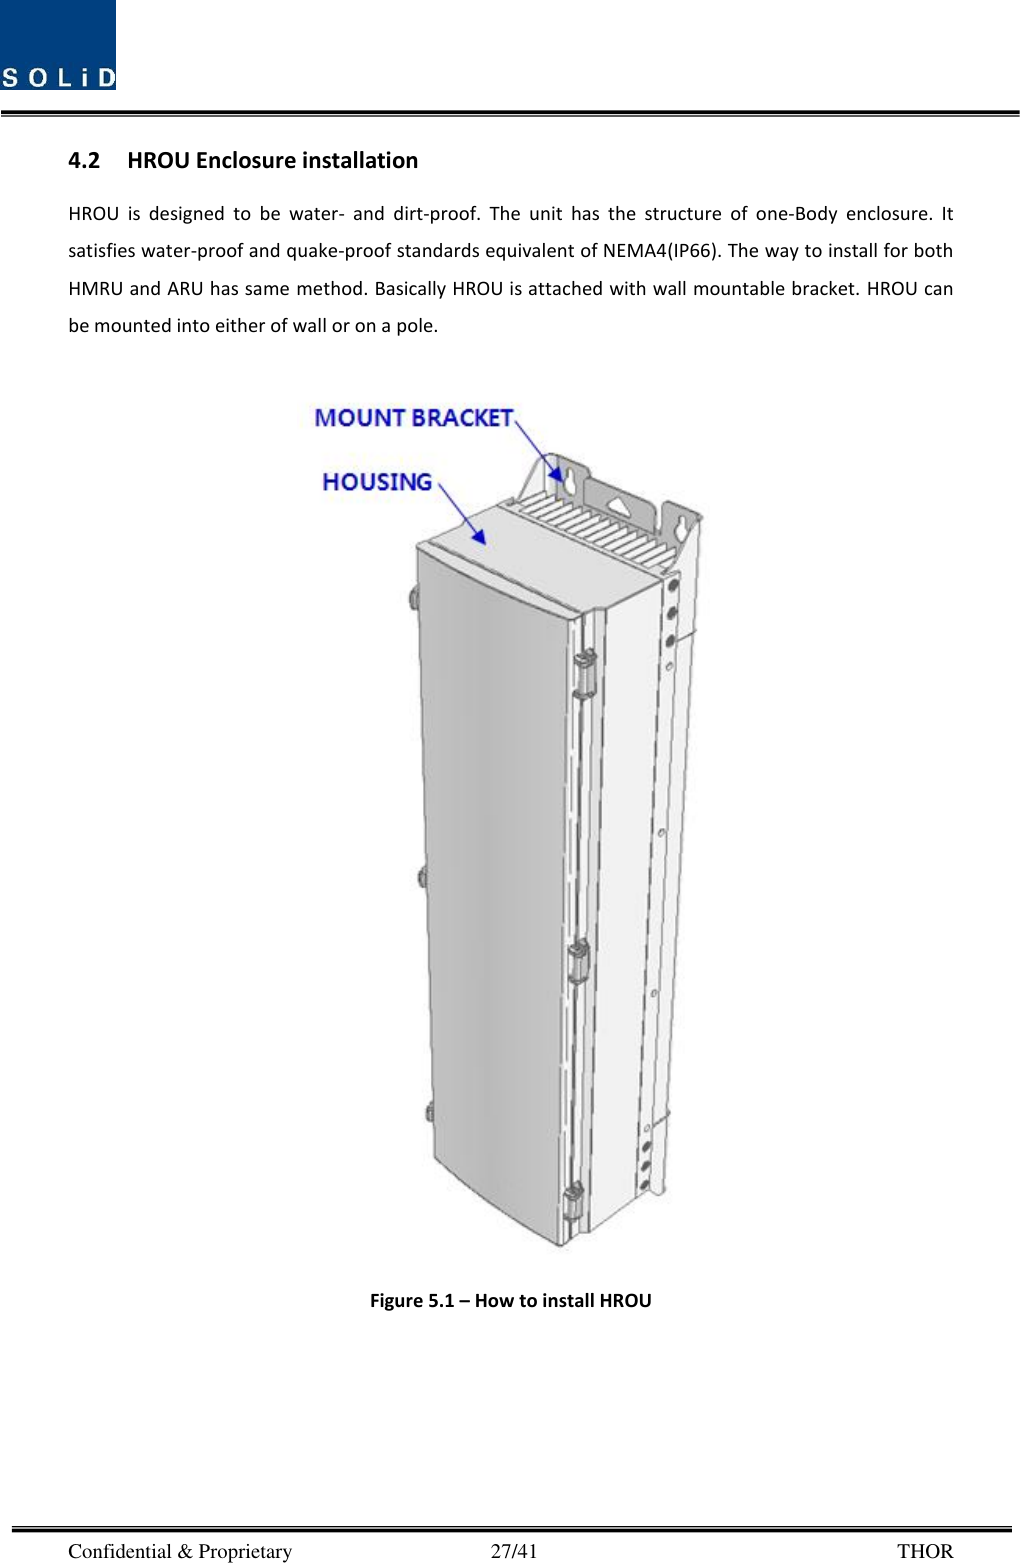  Confidential &amp; Proprietary                                      27/41       THOR 4.2 HROU Enclosure installation HROU  is  designed  to  be  water-  and  dirt-proof.  The  unit  has  the  structure  of  one-Body  enclosure.  It satisfies water-proof and quake-proof standards equivalent of NEMA4(IP66). The way to install for both HMRU and ARU has same method. Basically HROU is attached with wall mountable bracket. HROU can be mounted into either of wall or on a pole.     Figure 5.1 – How to install HROU 